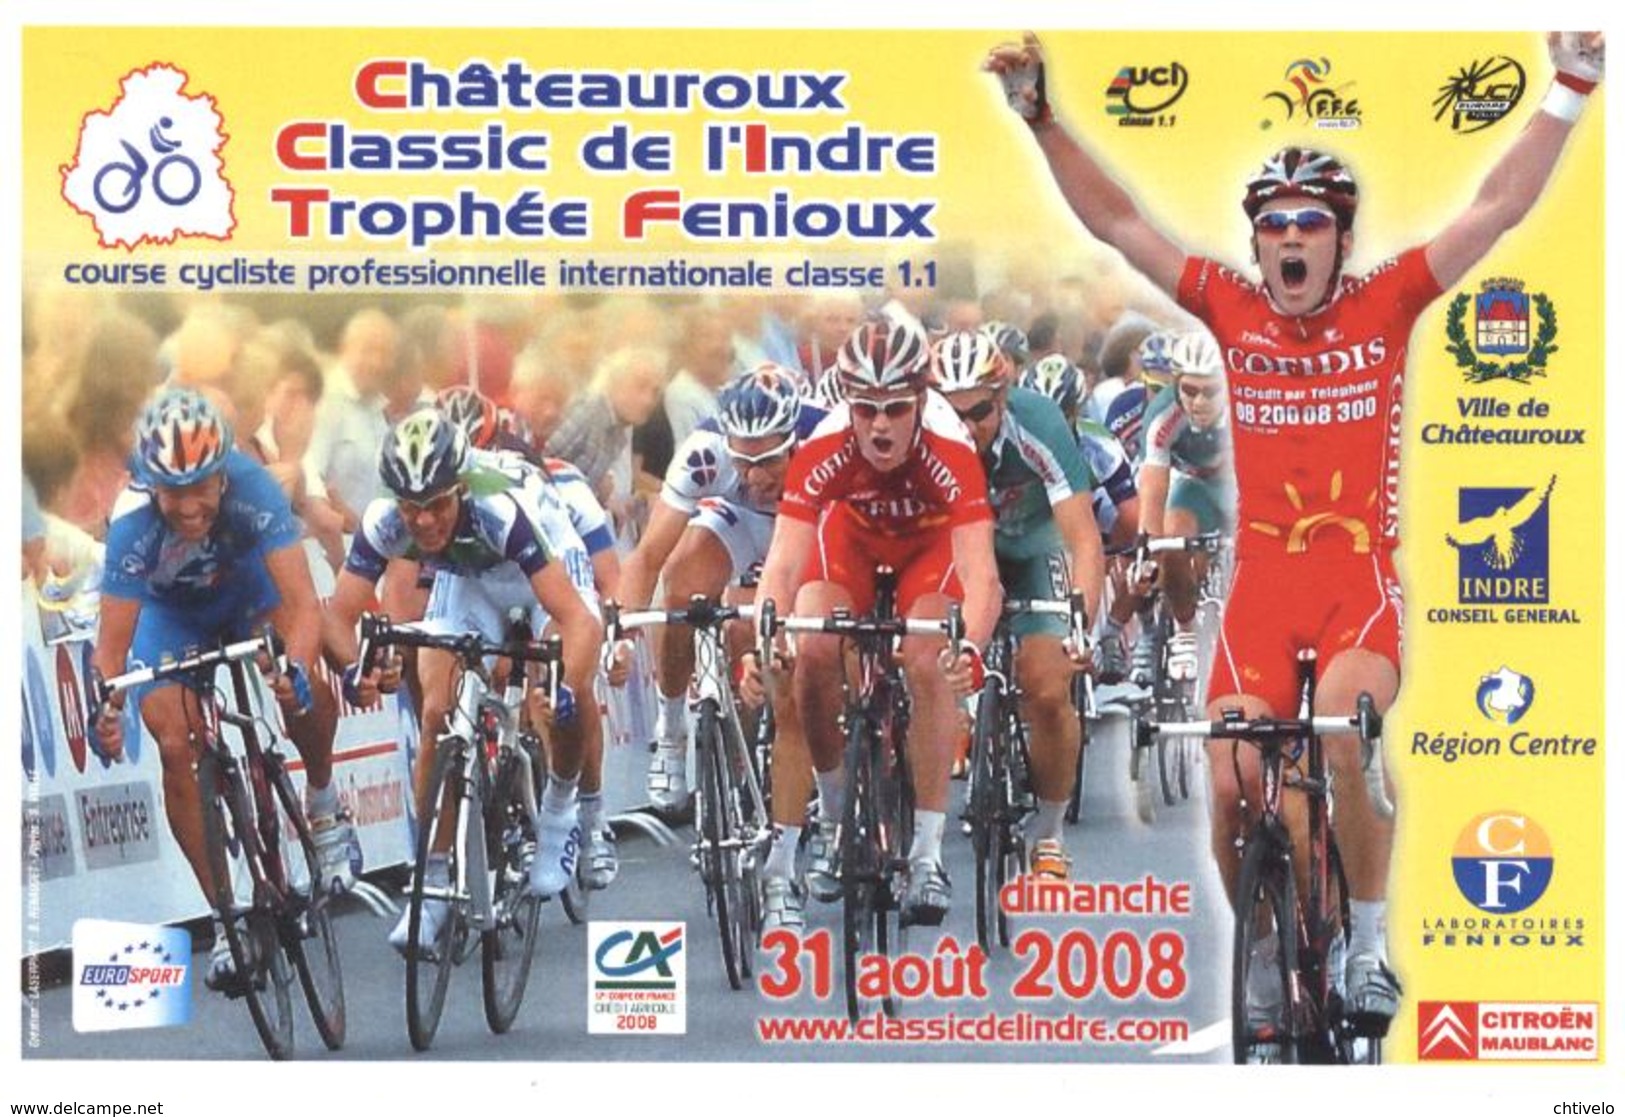 Cyclisme, Chateauroux Classic 2008 - Cycling